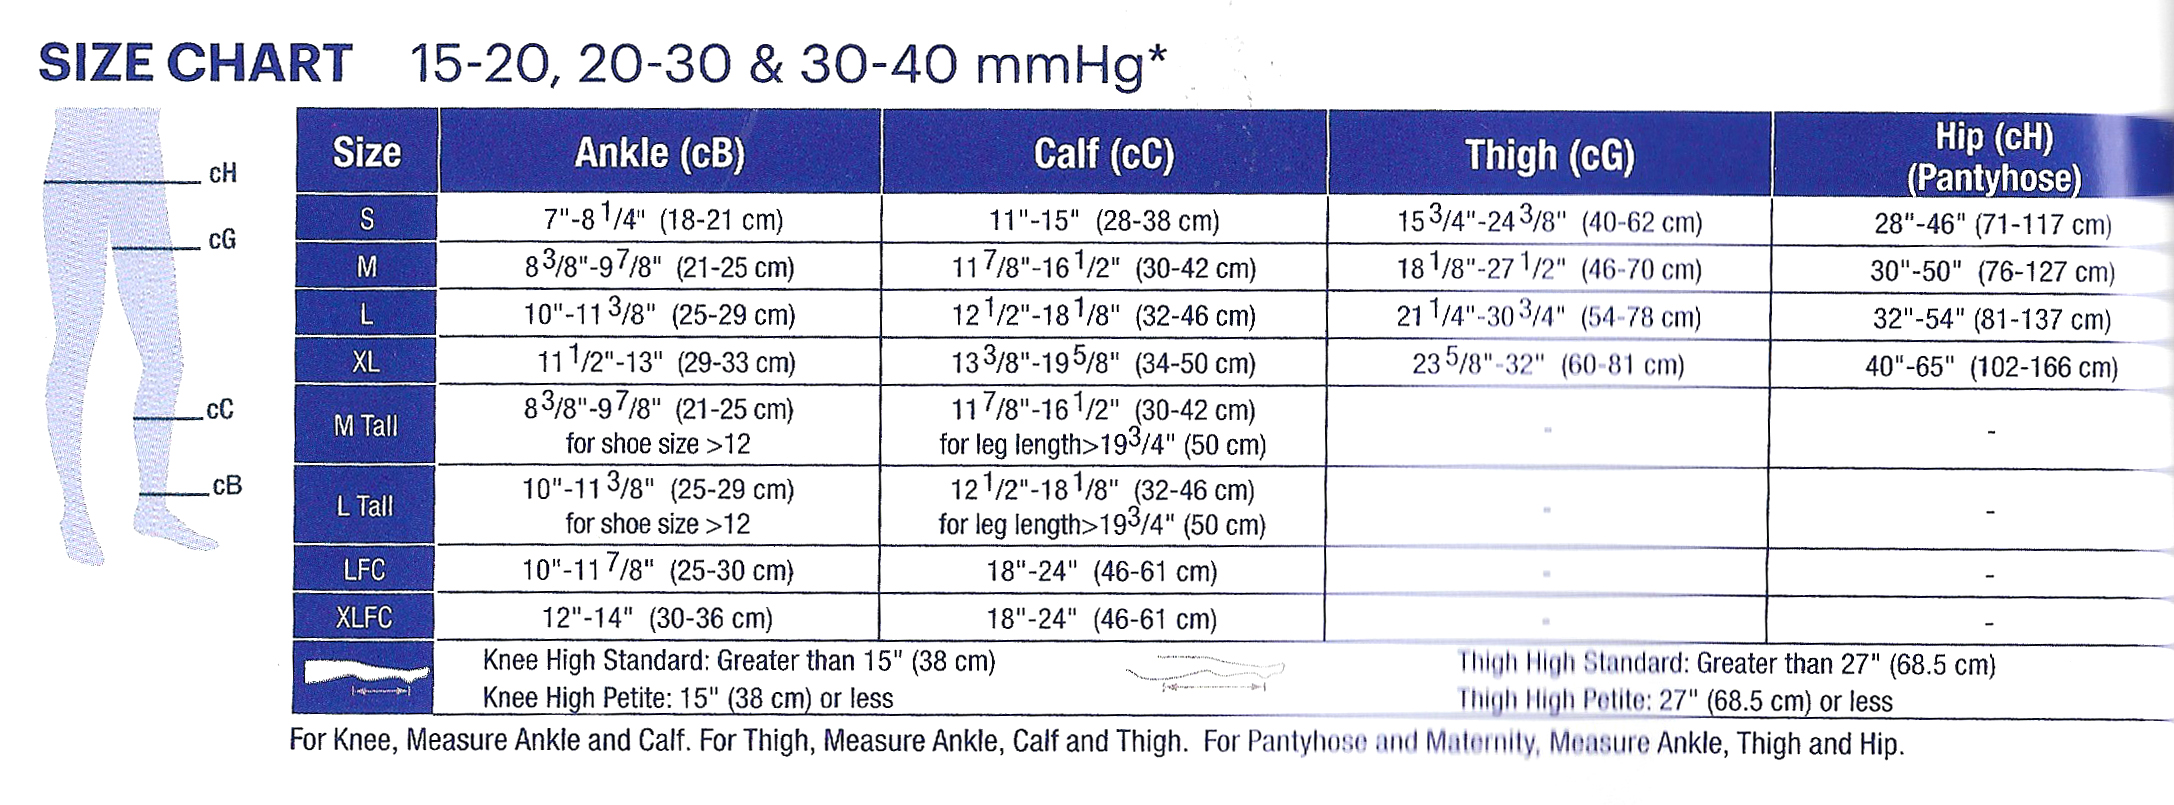 Jobst thigh high compression stockings size chart